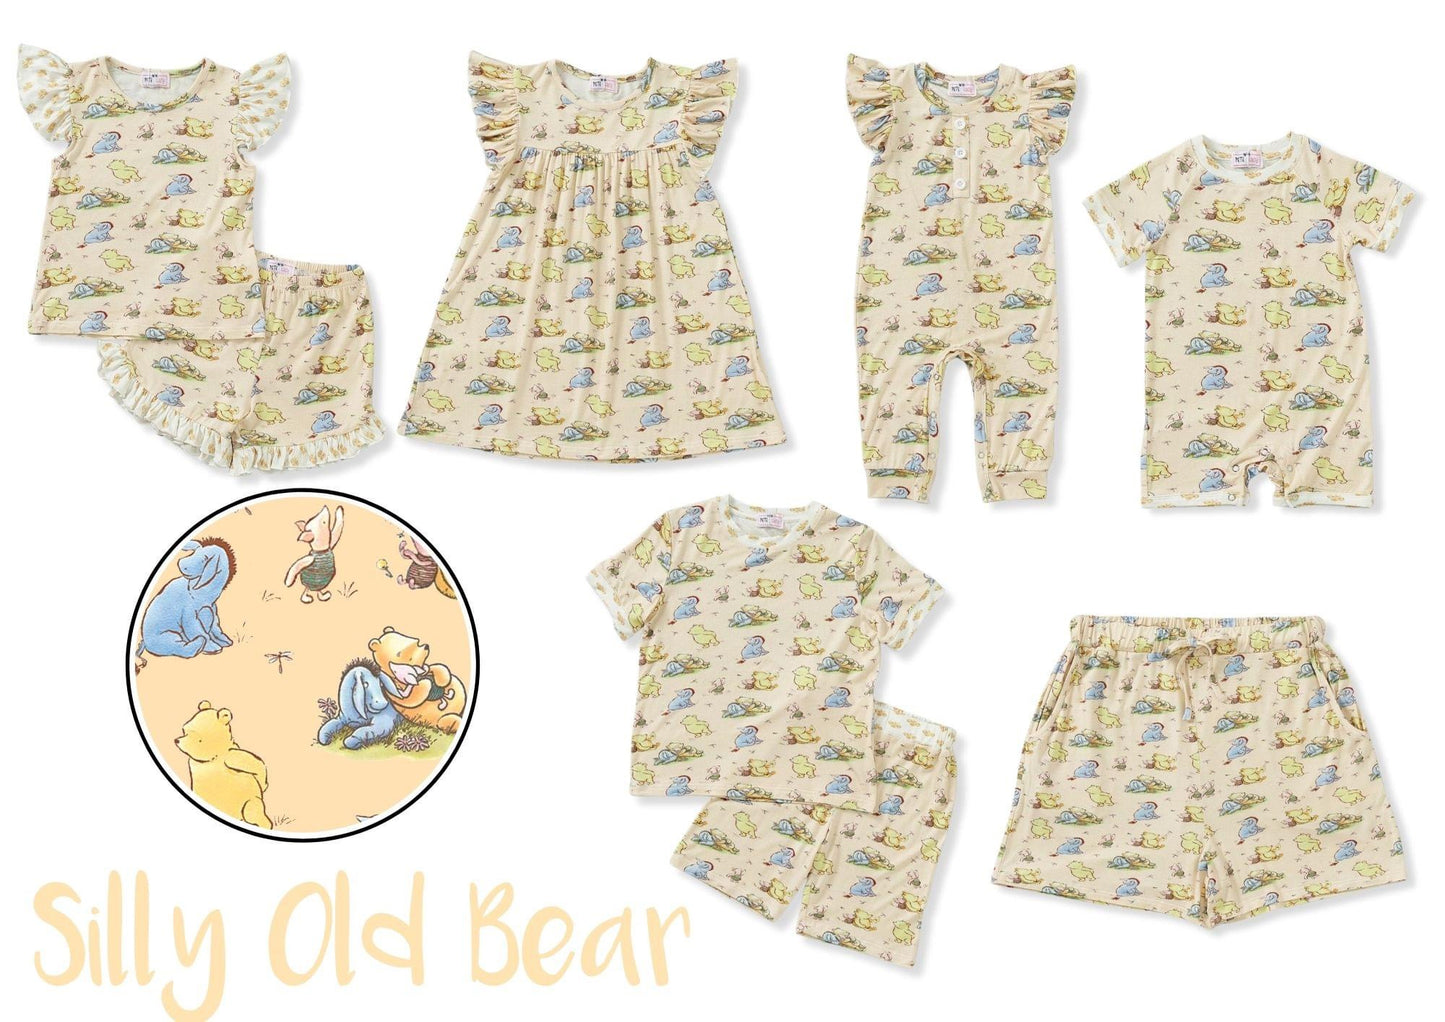 (Preorder) Silly Old Bear Loungewear Dress by Pete + Lucy